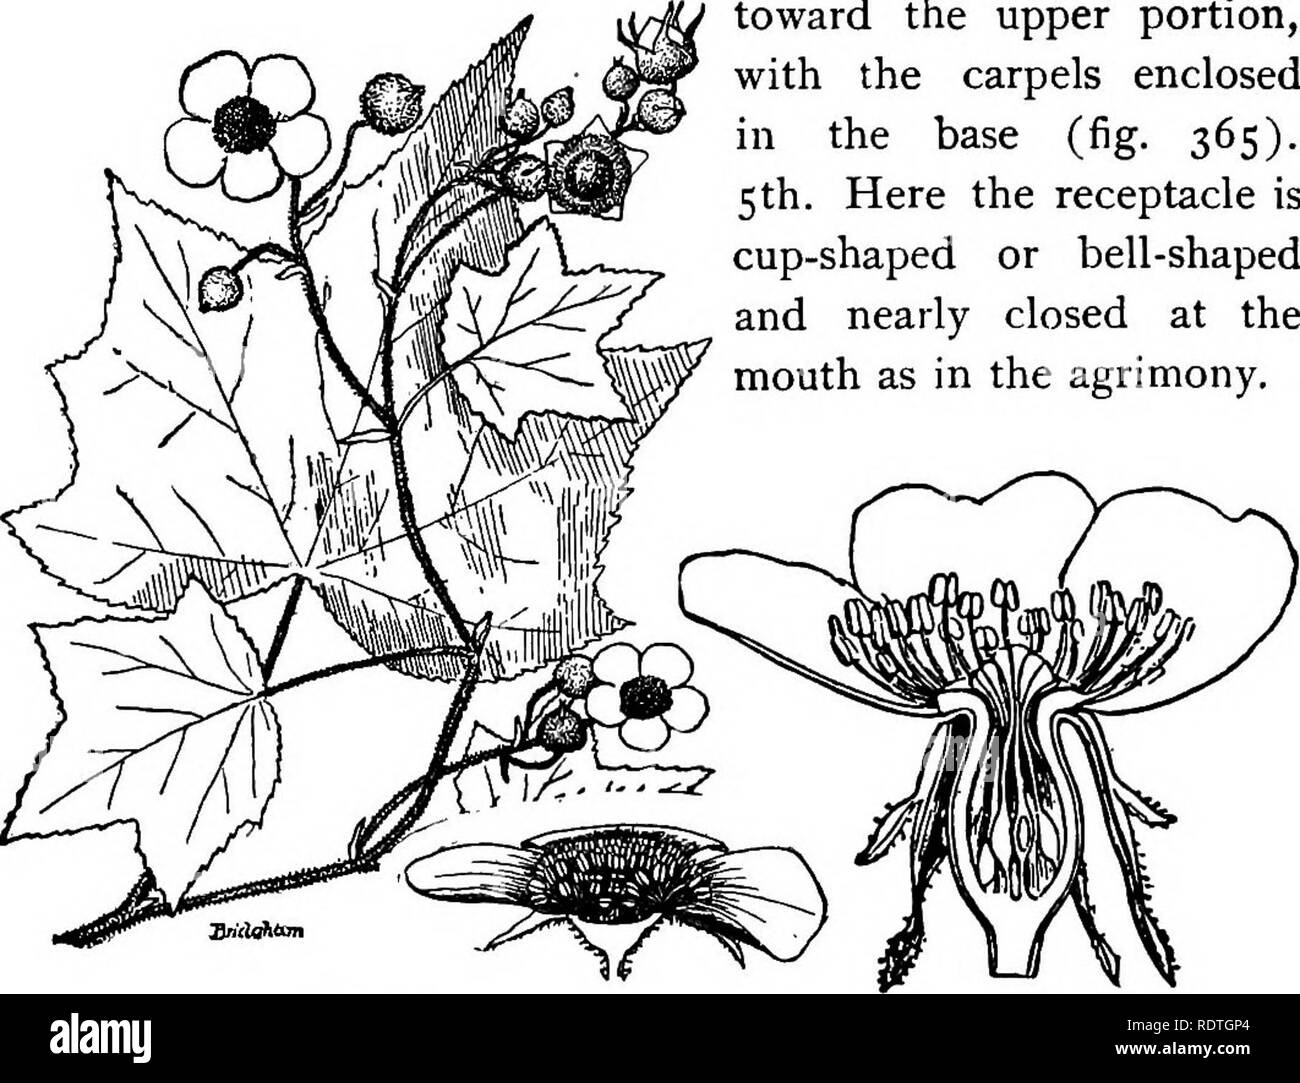 . Elementary botany. Botany. 2?6 DICOTYLEDONS.. toward the upper portion, with the carpels enclosed in the base (fig. 365). 5 th. Here the receptacle is cup-shaped or bell-shaped and nearly closed at the mouth as in the agrimony. Fig. 364. Fig- 365. Flowering raspberry (Rubus odoratus). Perigynous flower of rosa, with contracted receptacle. (From Warming.) 532. Lesson XII. The almond or plum family (amygdala- cese).—The members of this family are trees or shrubs. The common choke-cherry (fig. 366) will serve to represent one of the types. The flowers of this species are borne in racemes. The r Stock Photo